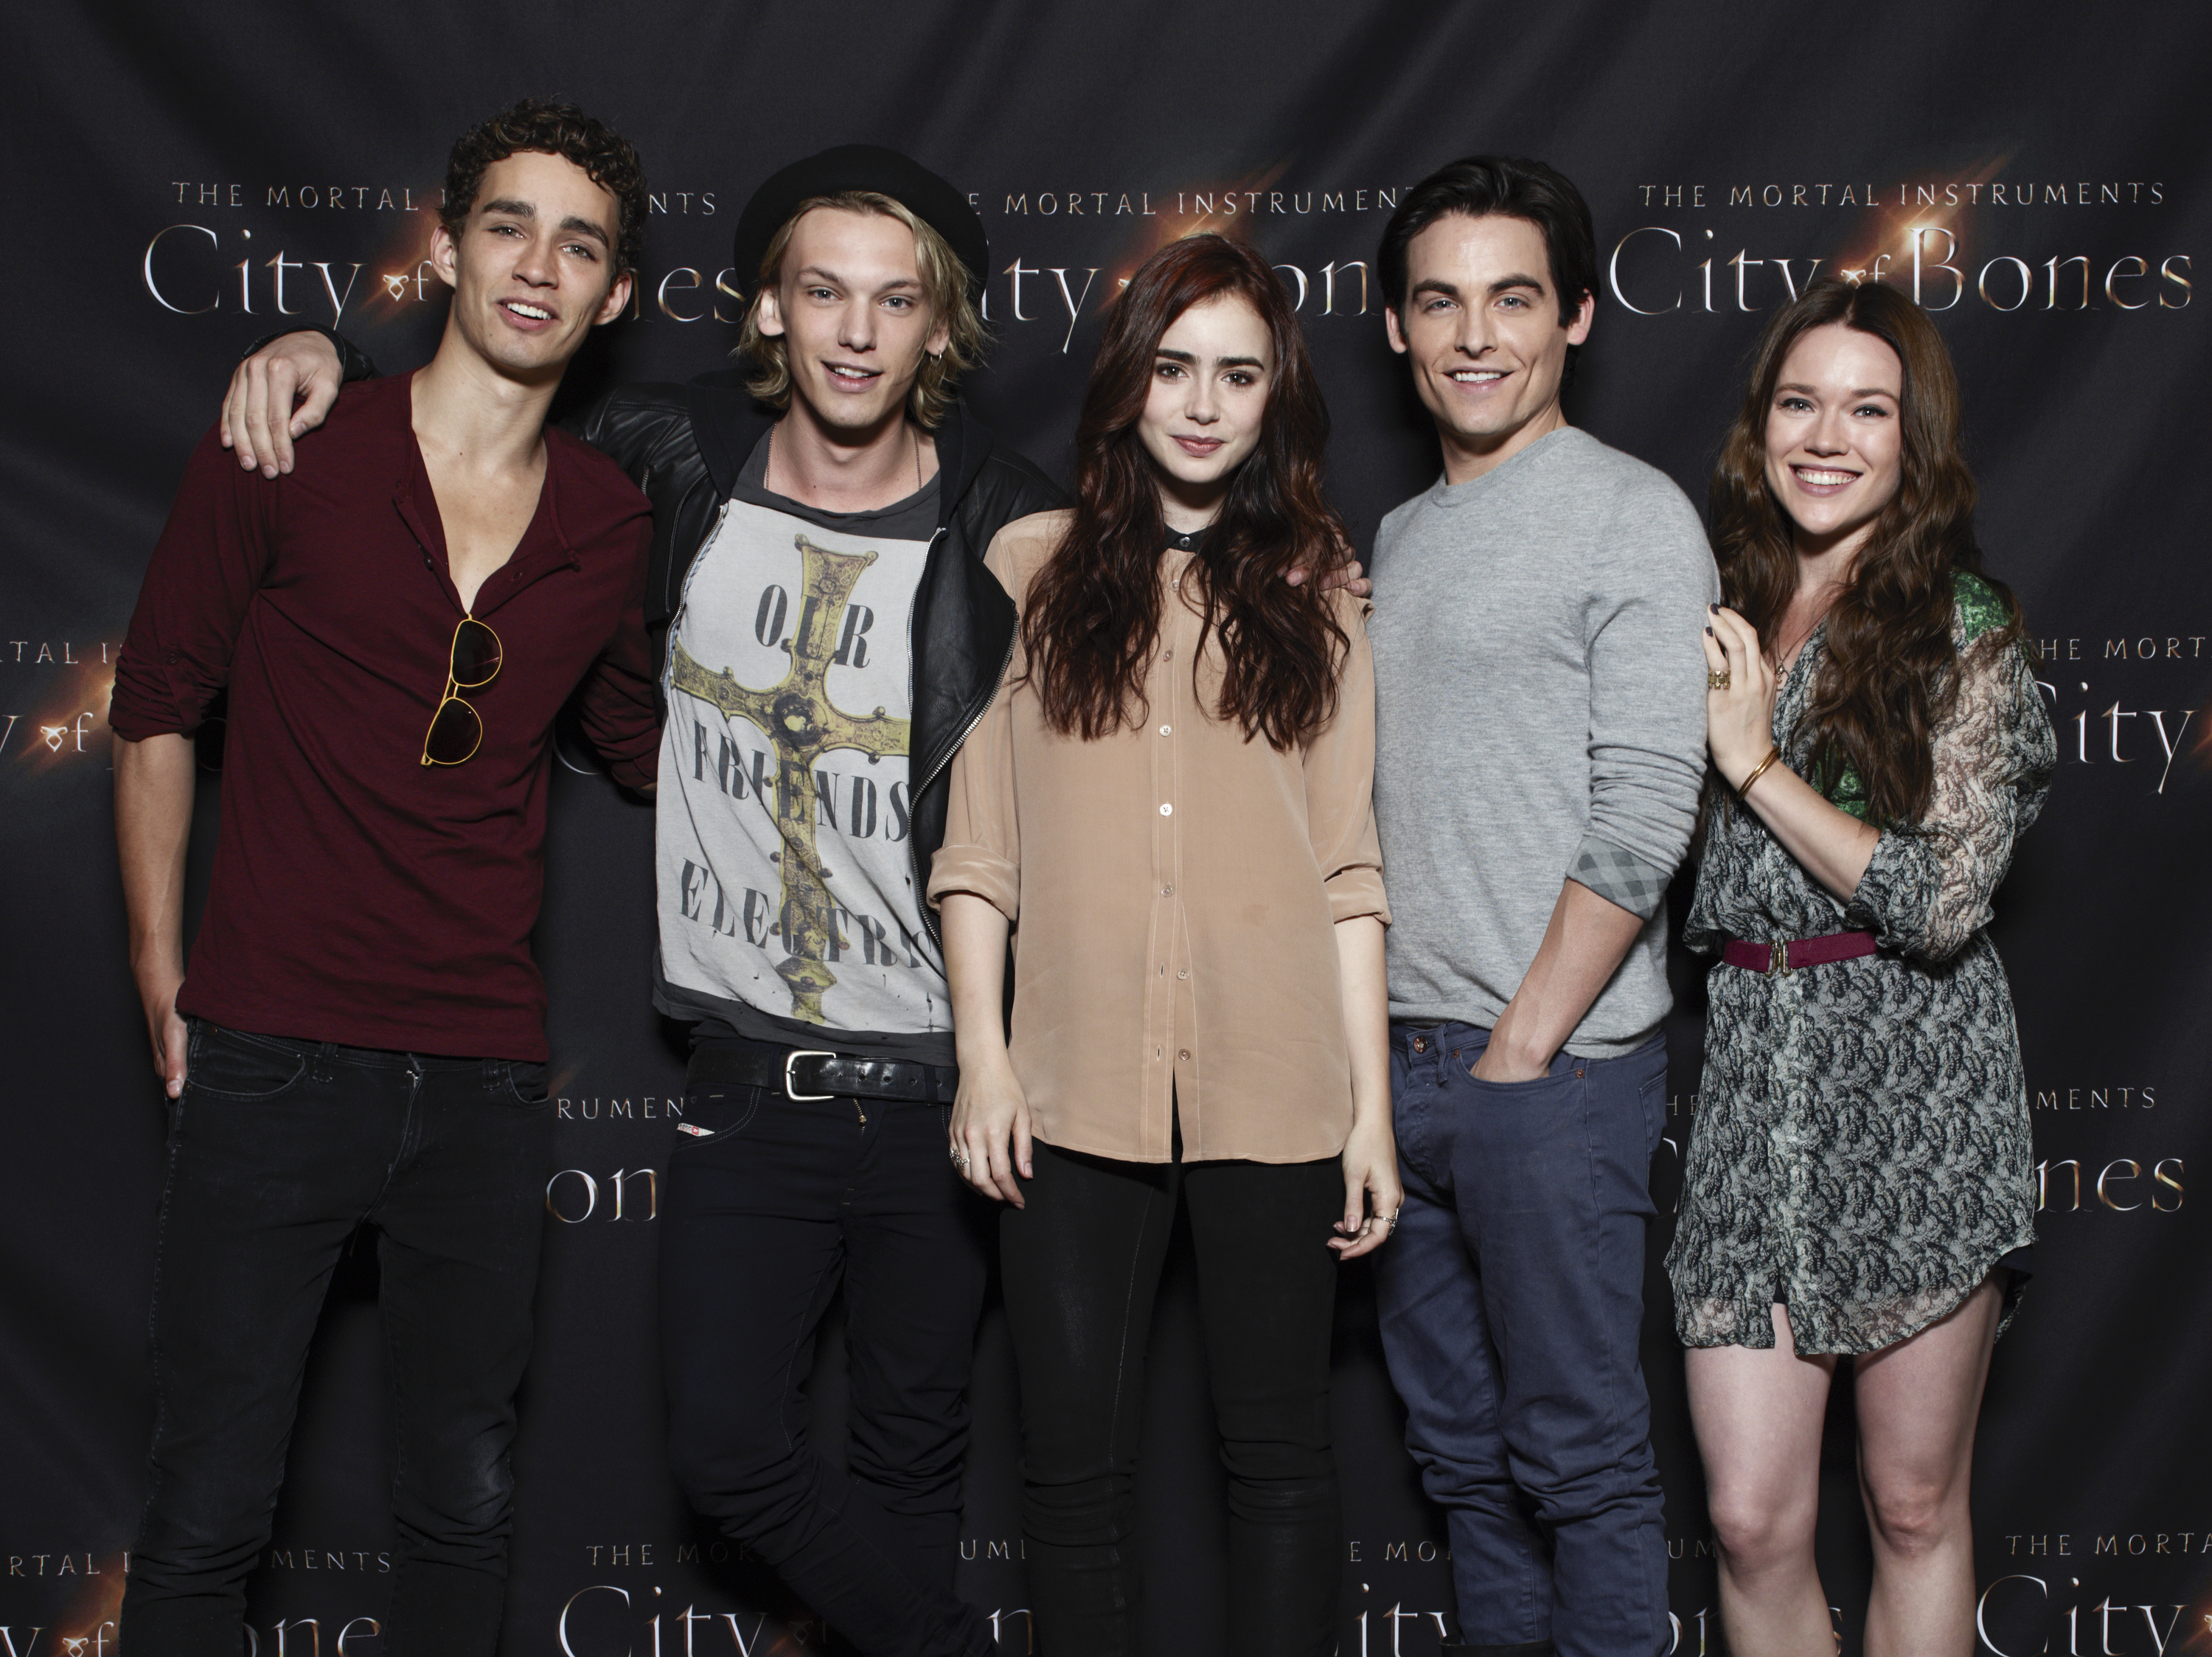 A First Look At 'The Mortal Instruments: City of Bones'